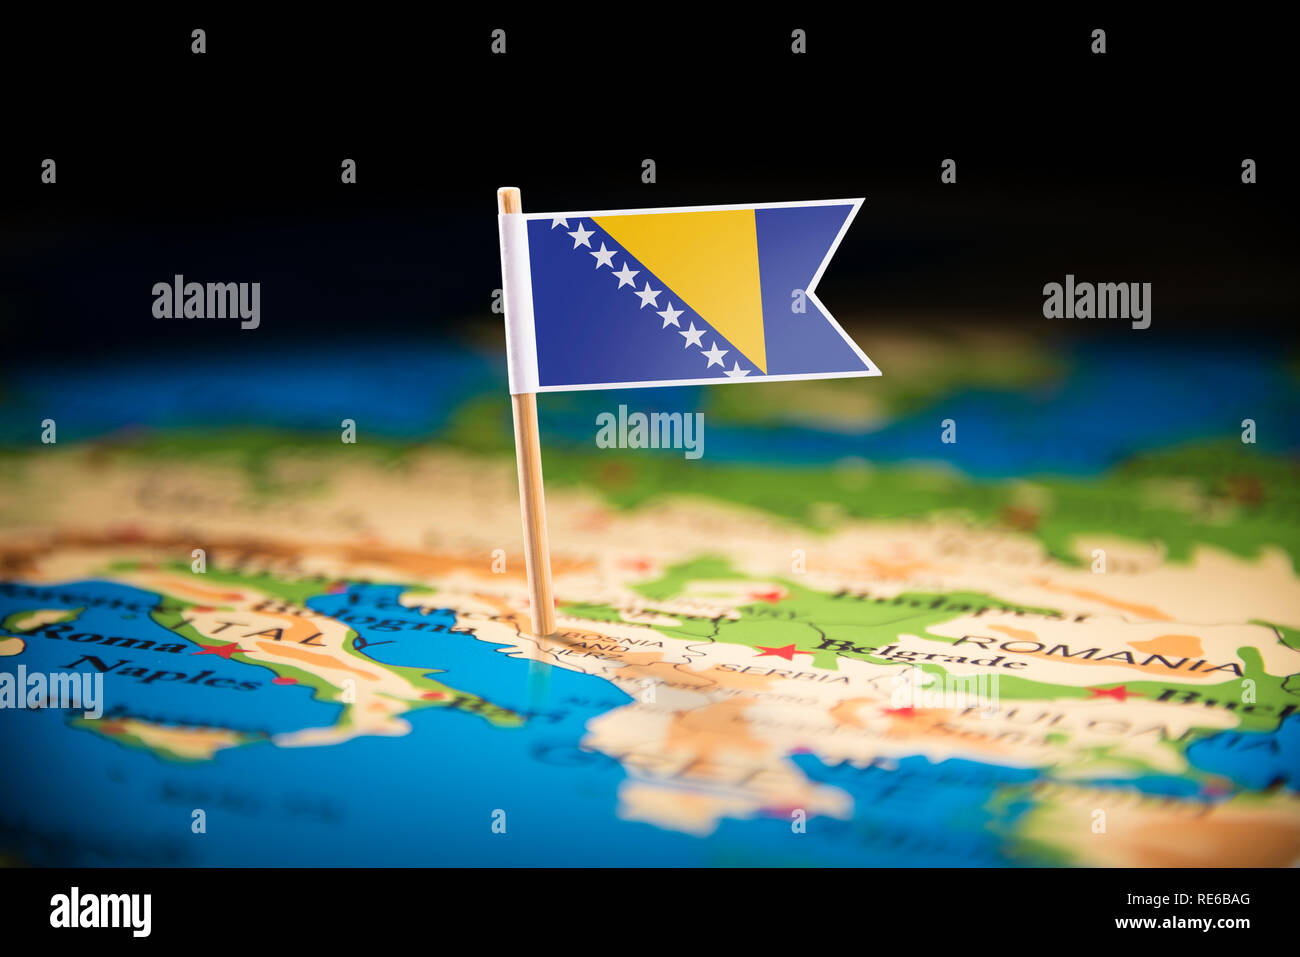 Bosnia and Herzegovina marked with a flag on the map Stock Photo